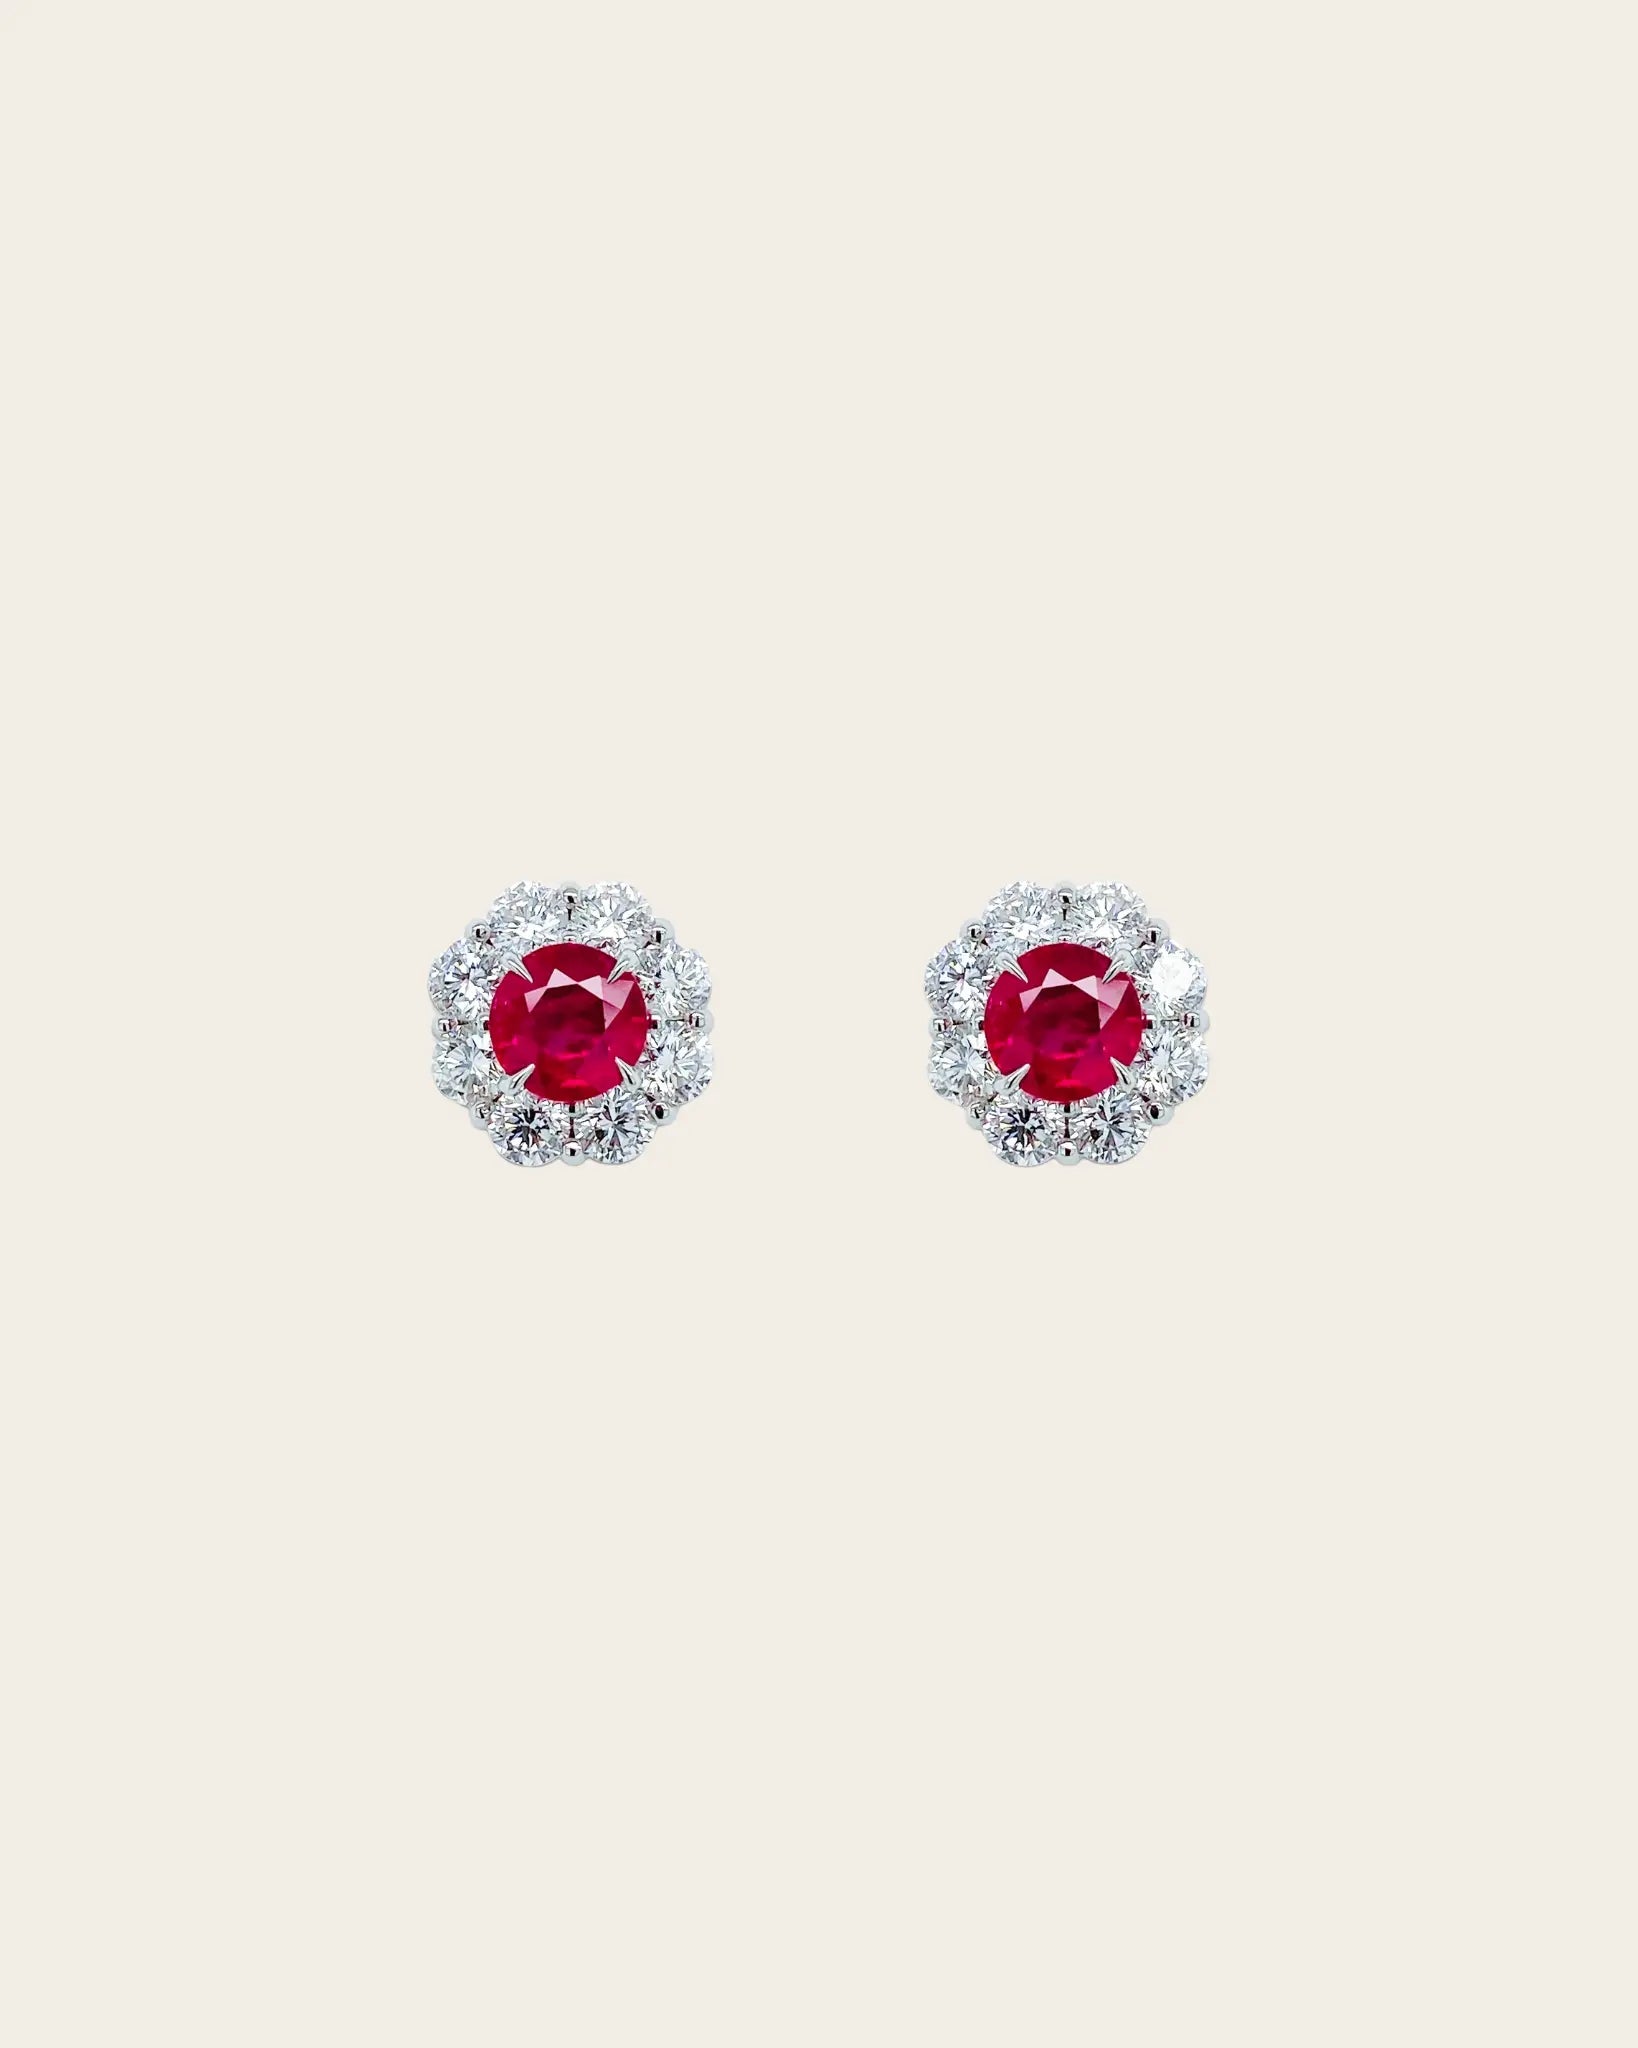 A pair of Bayco ruby and diamond stud earrings